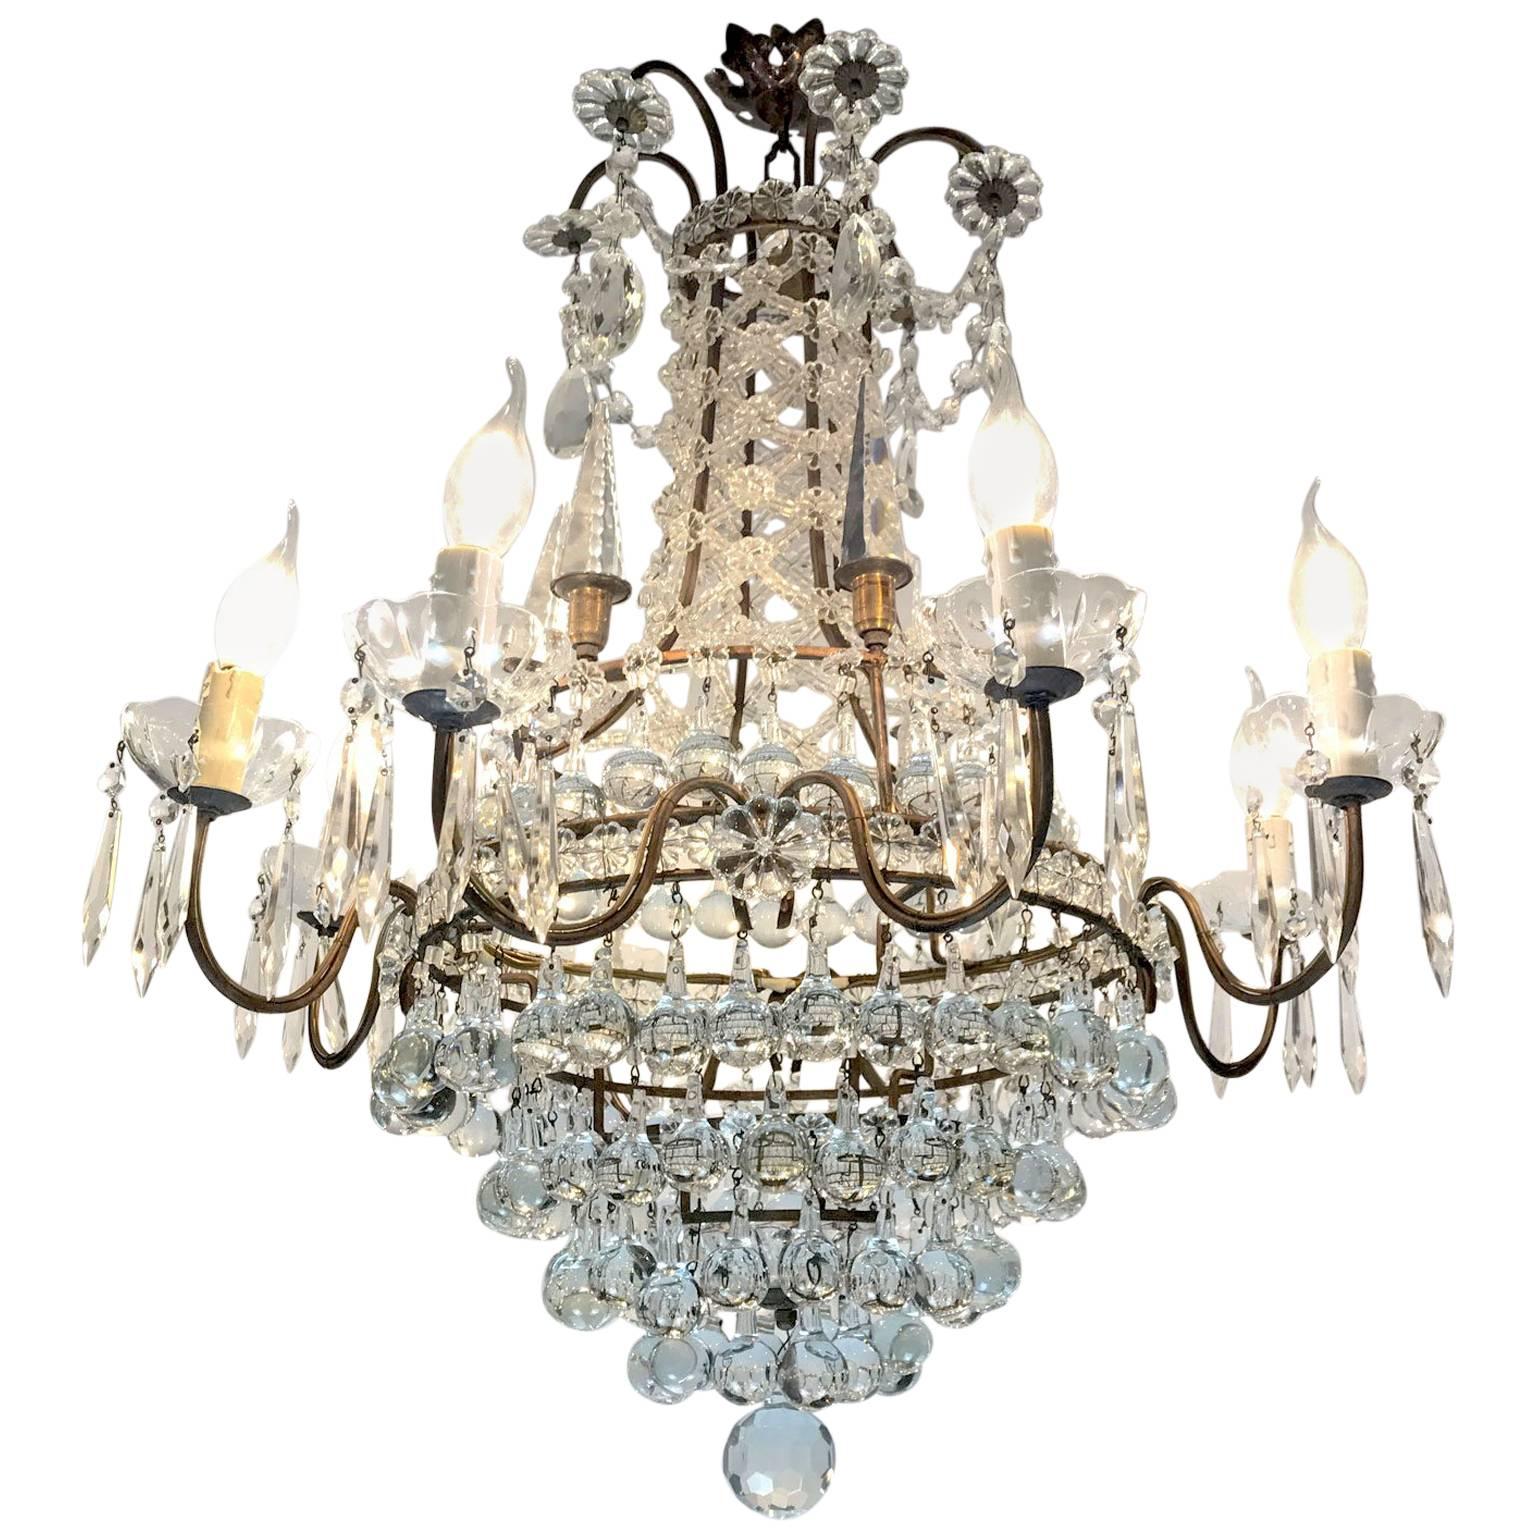 20th Century Italian Six-Light Crystal Bronze Chandelier from a Milanese Palazzo